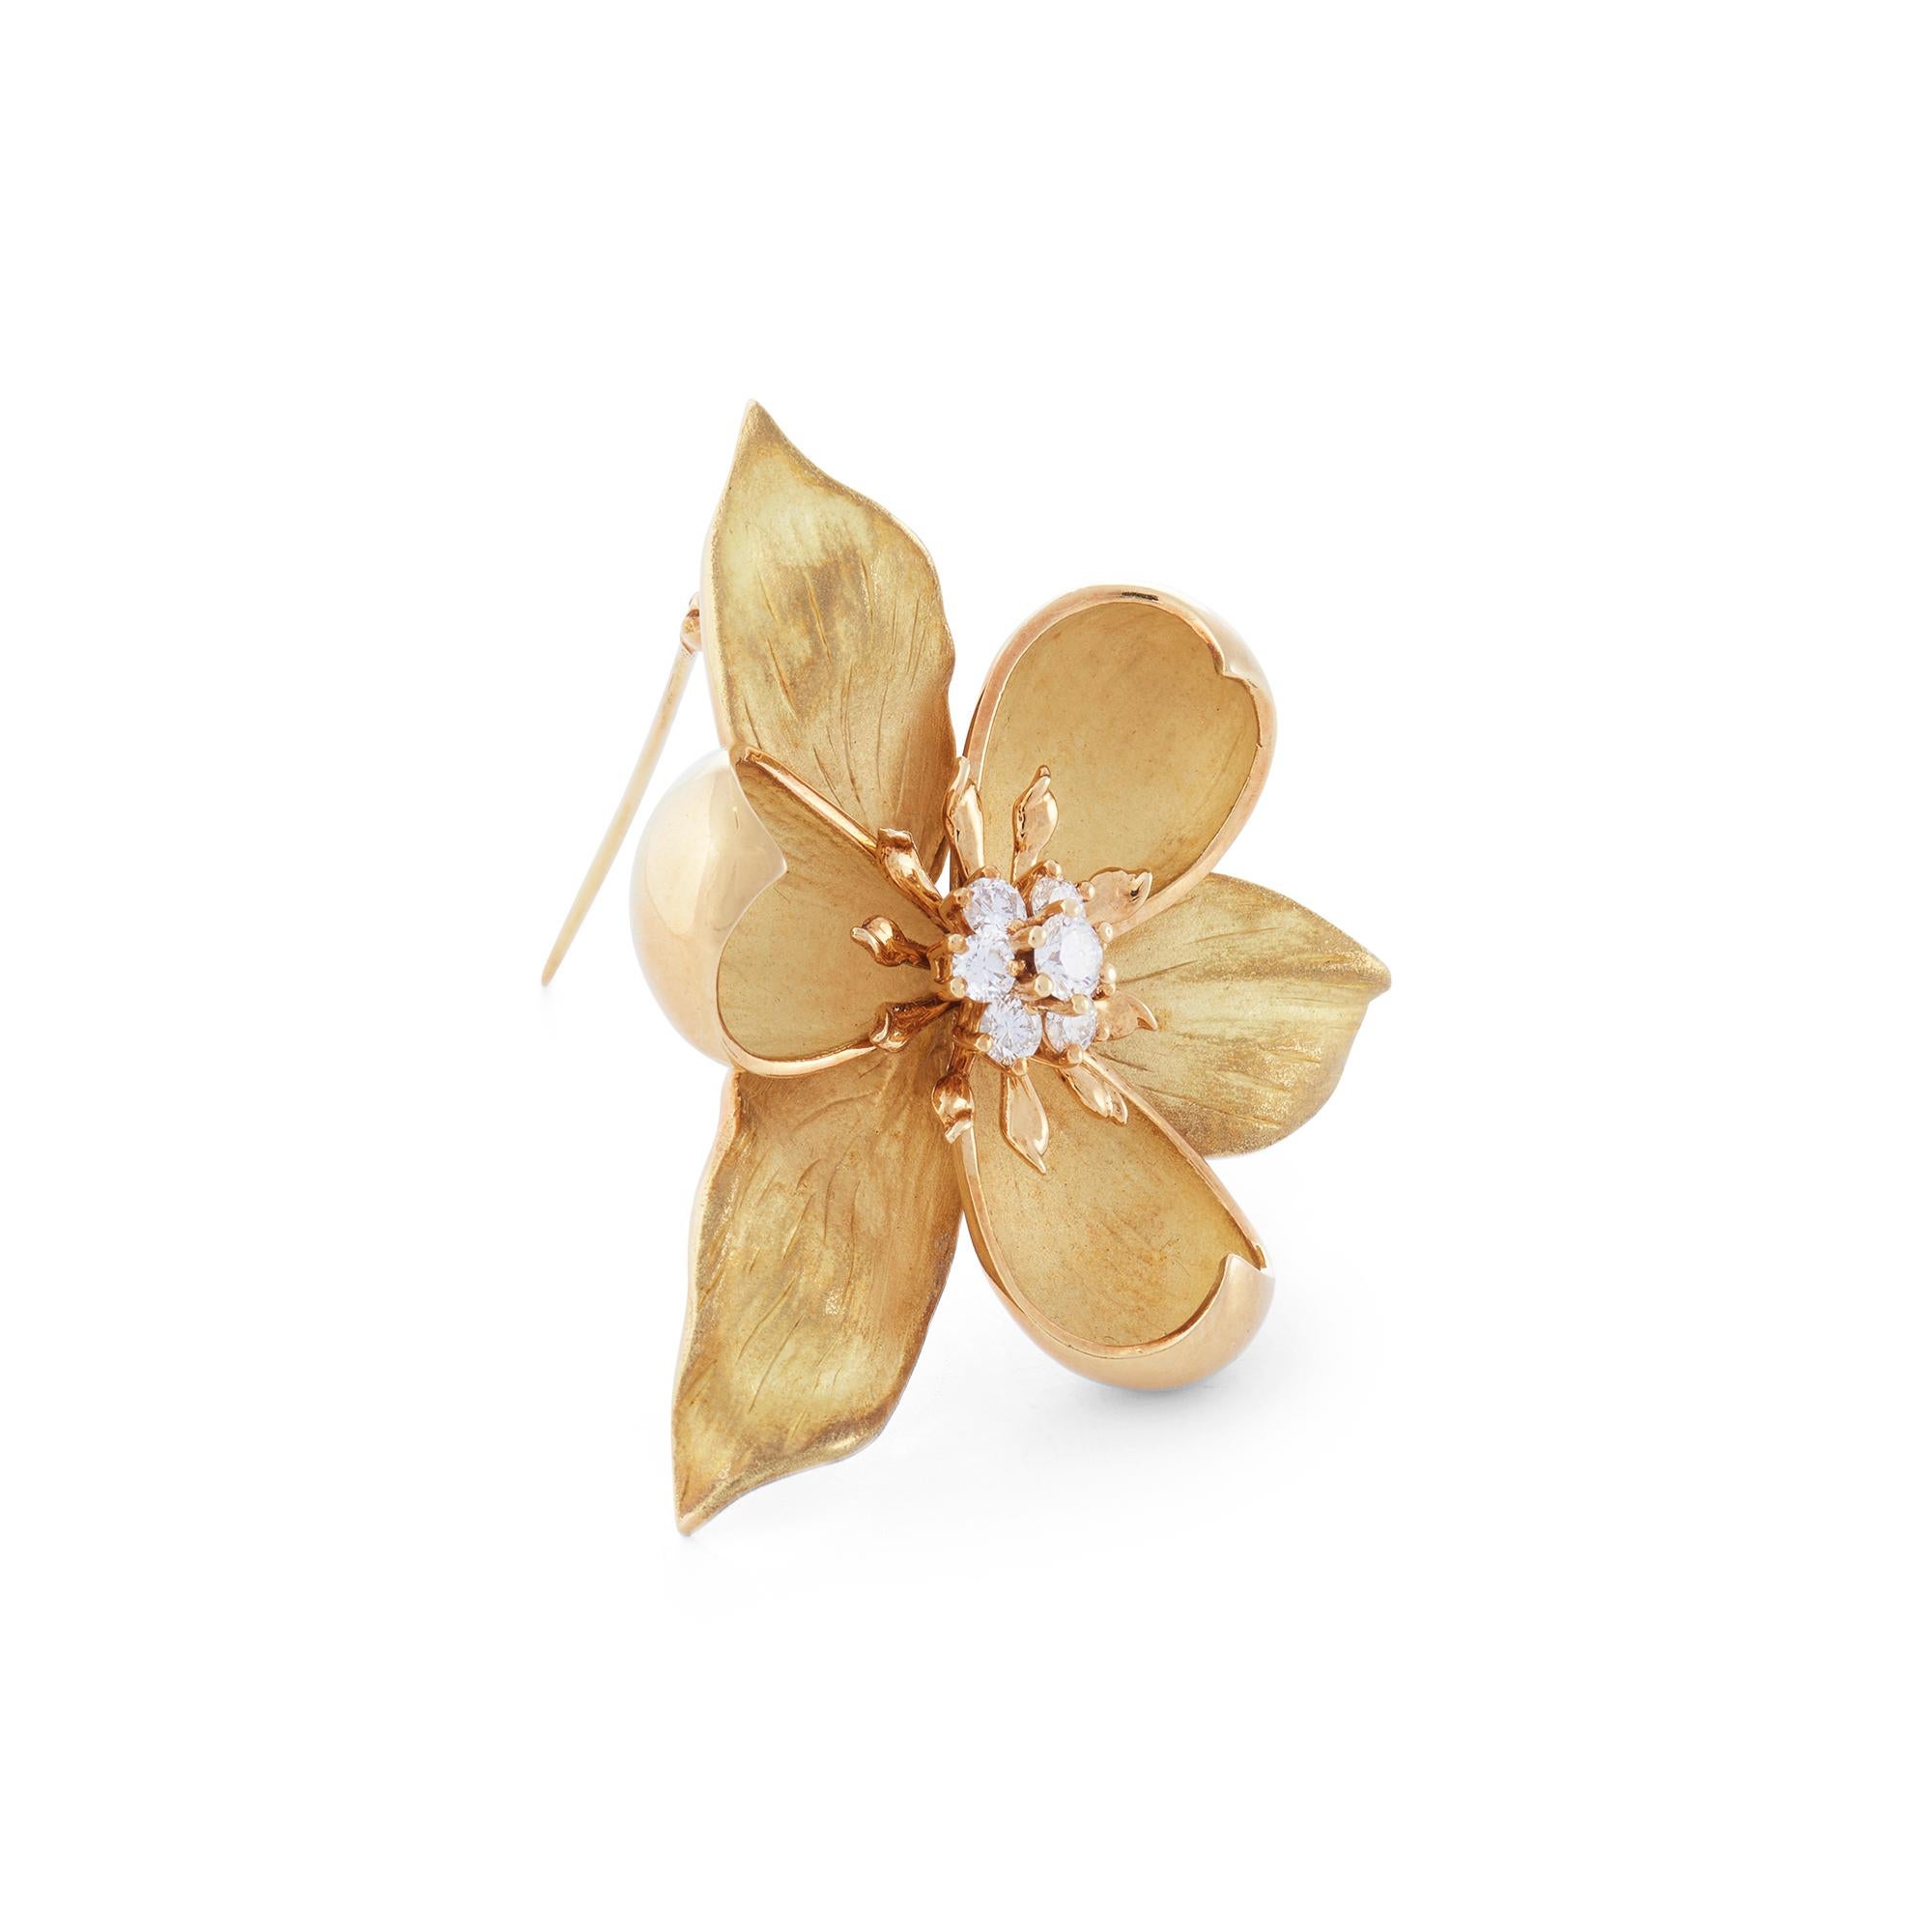 Authentic Tiffany & Co. brooch from the iconic Dogwood collection crafted in 18 karat yellow gold. The petals are sculpted in brushed and polished gold, and are accented with seven round brilliant cut diamonds (F-G/VS) weighing an estimated 0.55